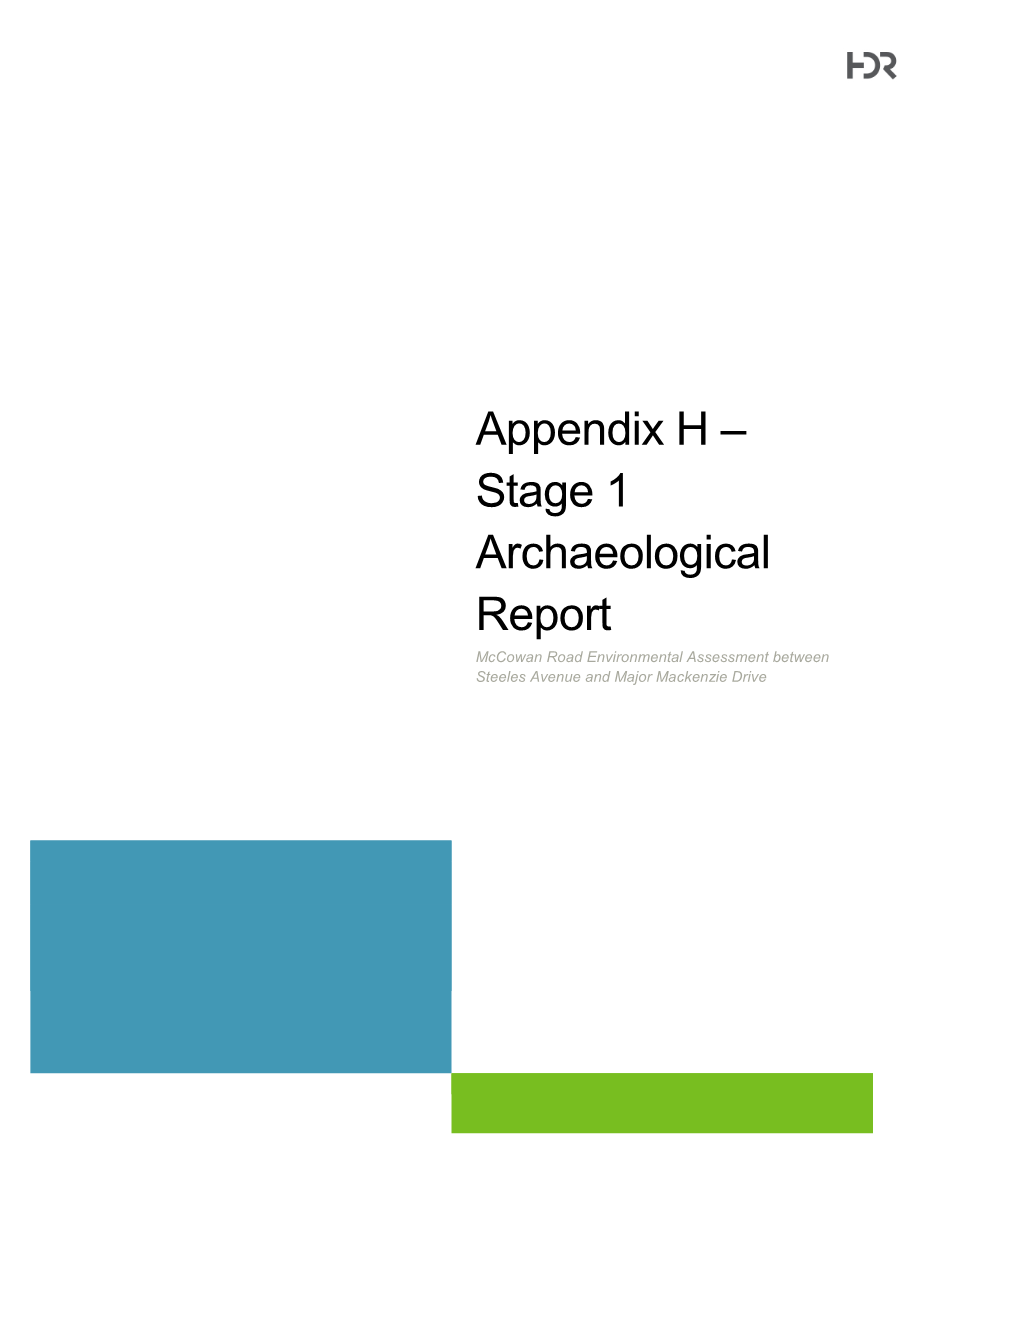 Appendix H Stage 1 Archeological Report 1 of 2